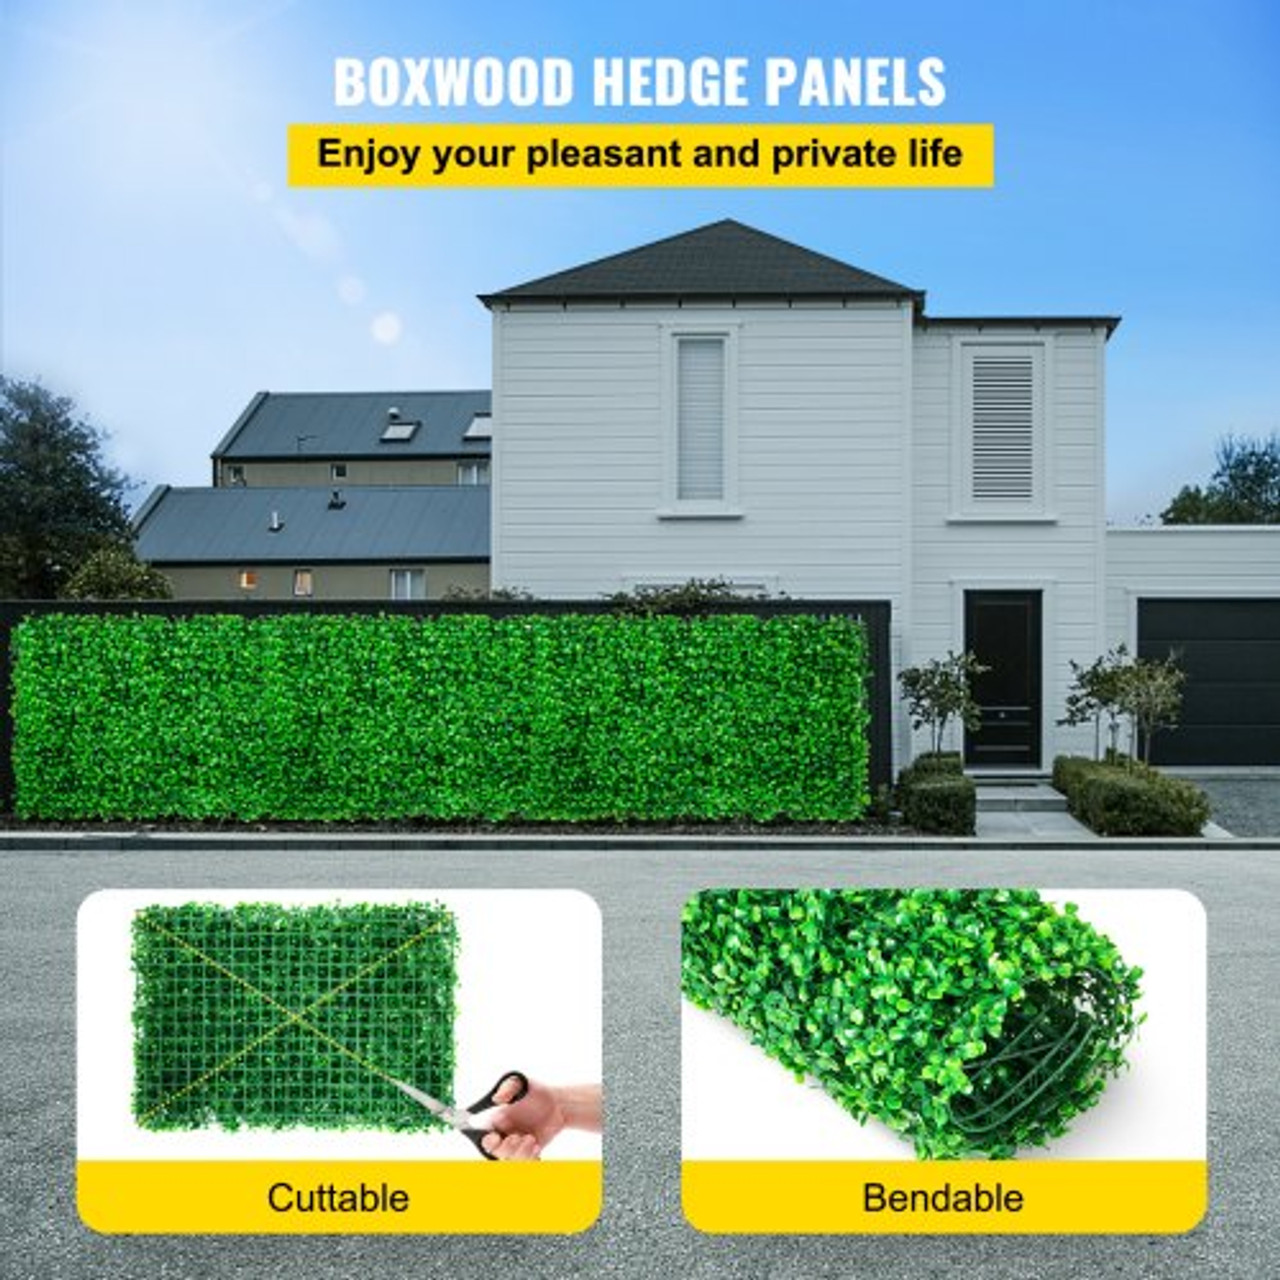 Artificial Boxwood Panel UV 4pcs Boxwood Hedge Wall Panels Artificial Grass Backdrop Wall 24X16" 4 cm Green Grass Wall Fake Hedge for Decor Privacy Fence Indoor Outdoor Garden Backyard